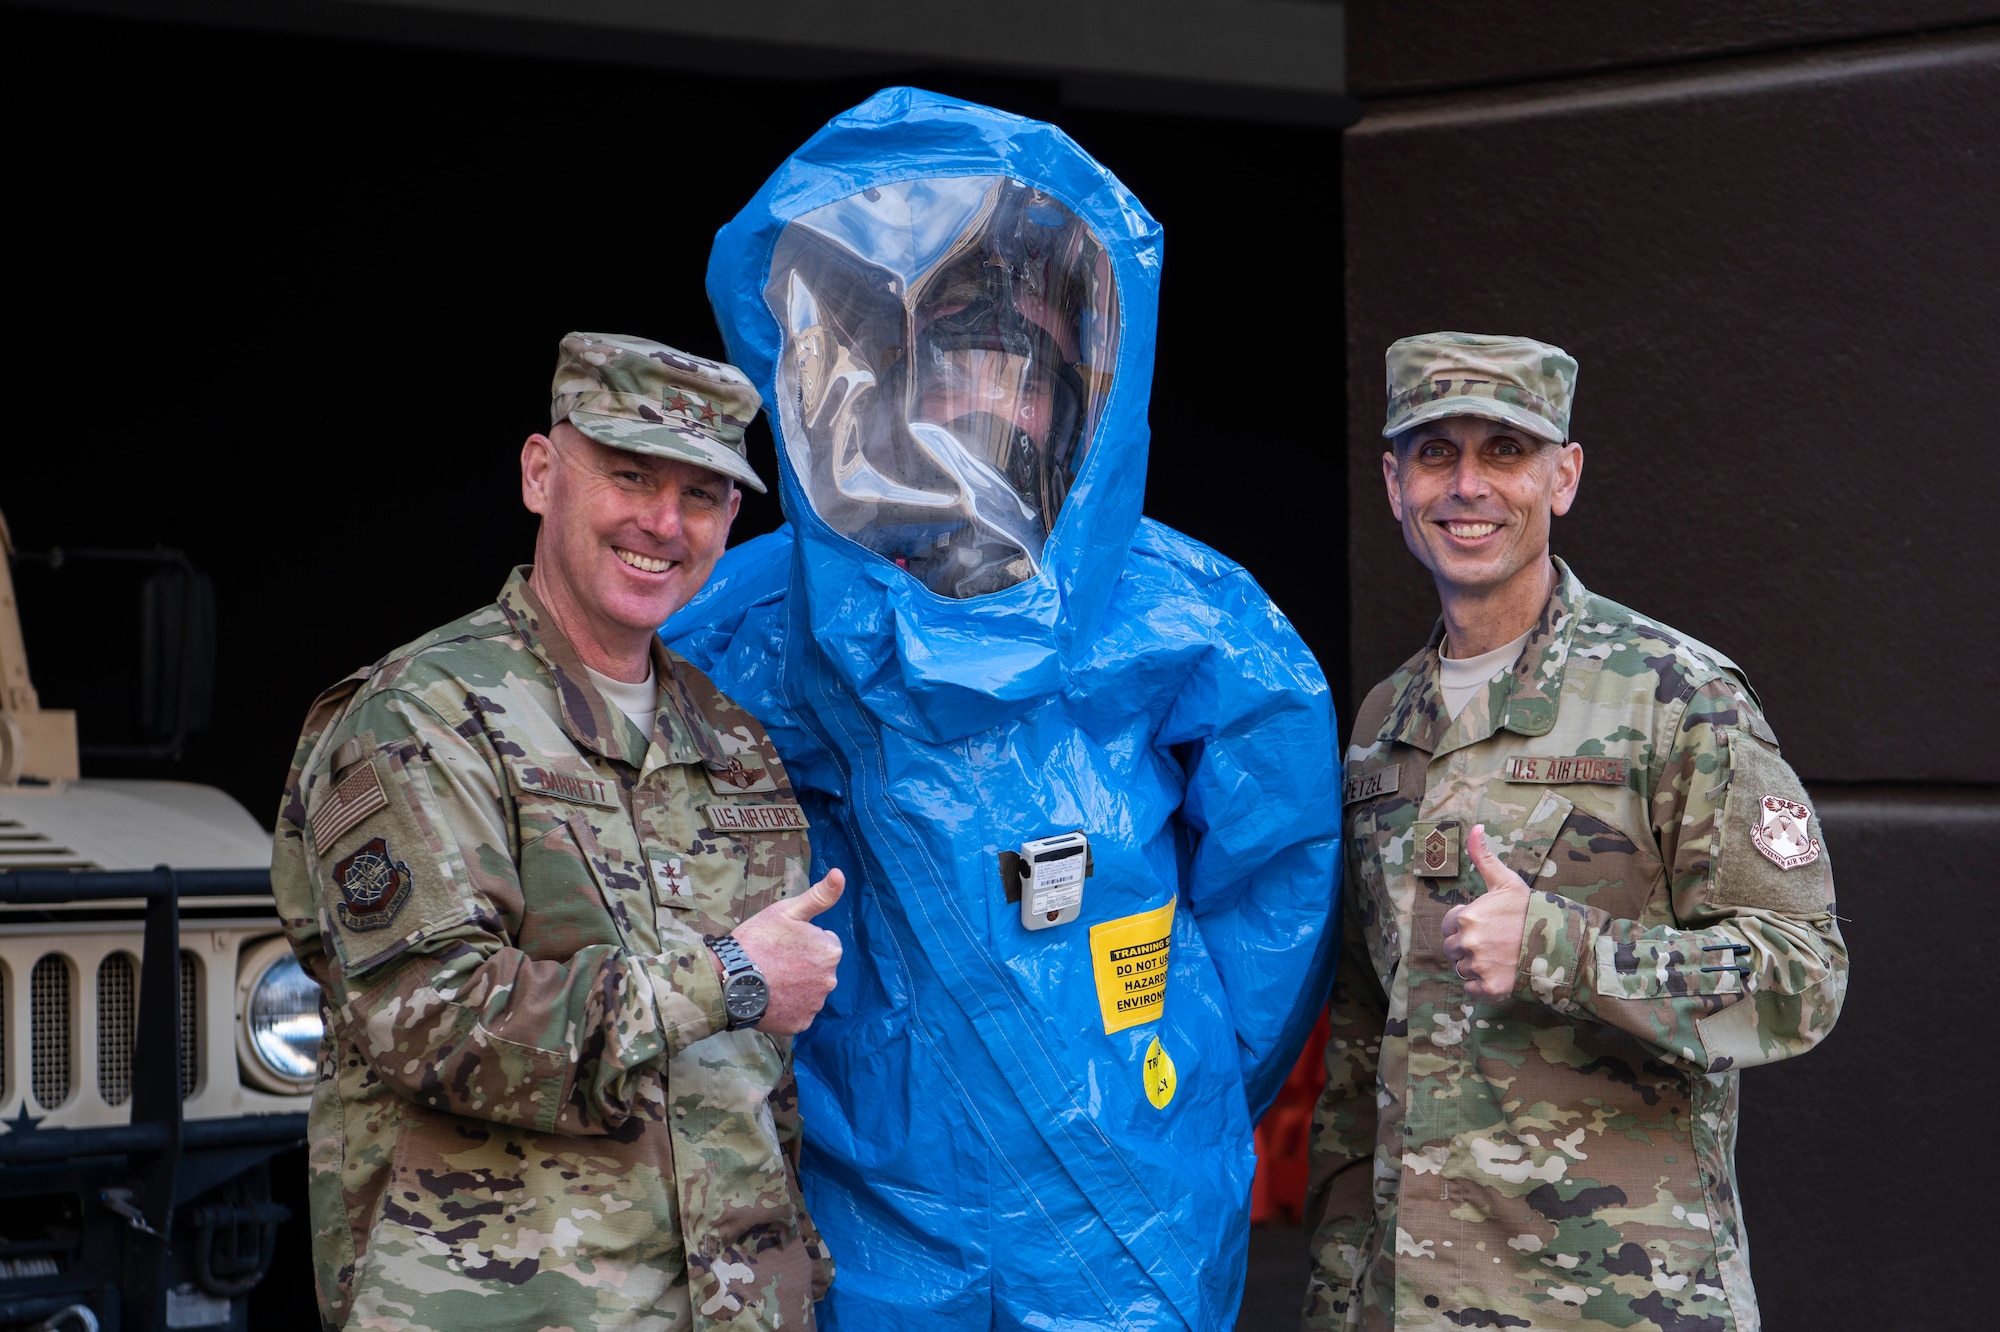 Maj. Gen. Sam Barrett, 18th Air Force commander, and Chief Master Sgt. Todd Petzel, 18th AF command chief, pose for a photo with an Airman from the 375th Medical Group bioenvironmental health technician during a three-day tour Oct. 10 - 13, 2018 at Scott Air Force Base, Illinois. The commander and command chief were able to learn from various Airmen about what they do and how they support the greater mission. (U.S. Air Force photo by Senior Airman Melissa Estevez)